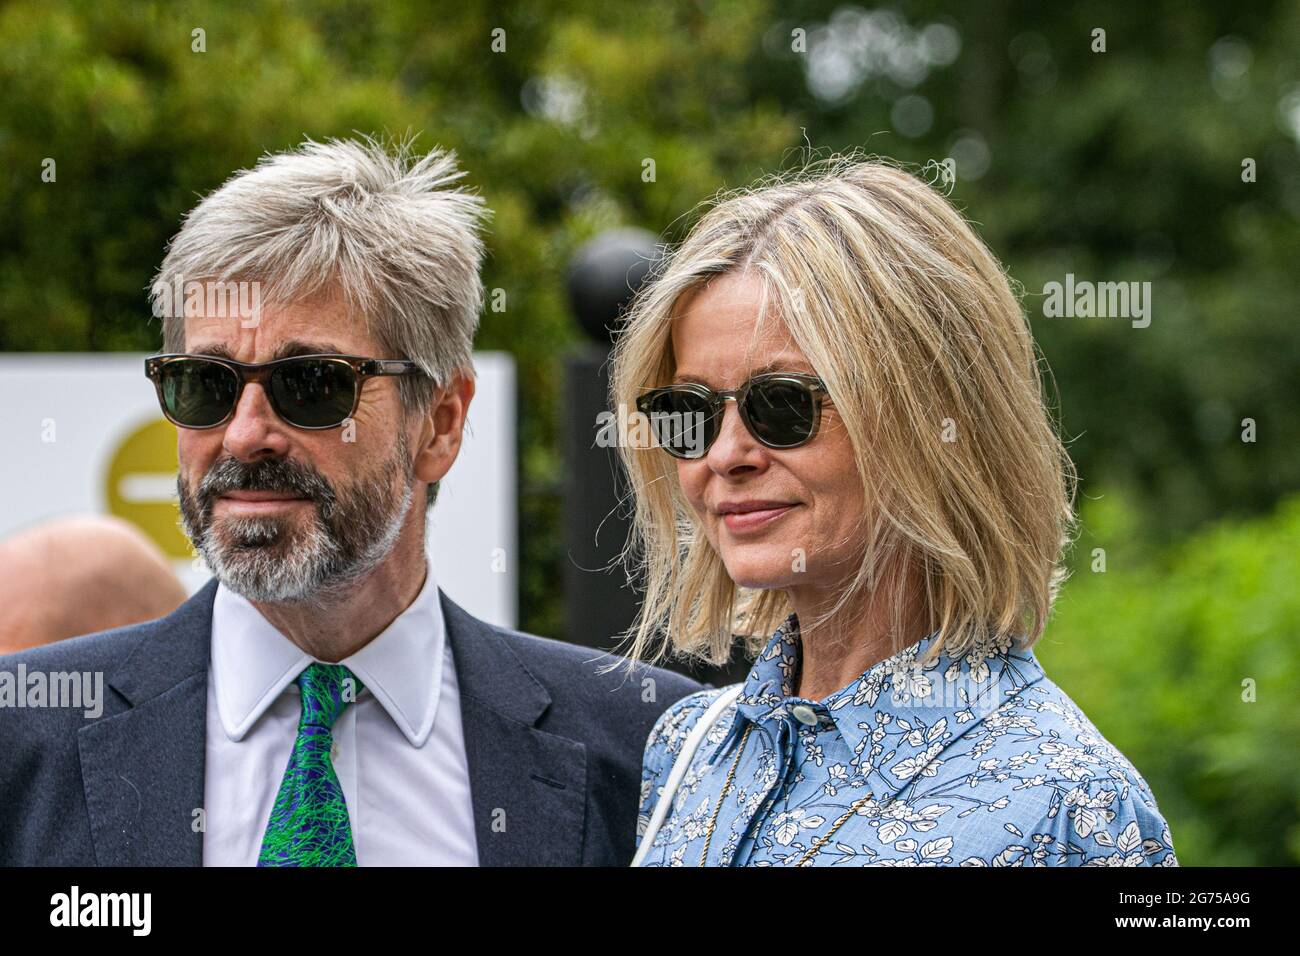 WIMBLEDON LONDON  11 July 2021. Lady Helen Windsor arrives with husband Timothy Taylor  at the All England Lawn Tennis Club for  the Gentlemen's singles final  on day 13 of the Wimbledon Championships.  Credit amer ghazzal/Alamy Live News Stock Photo